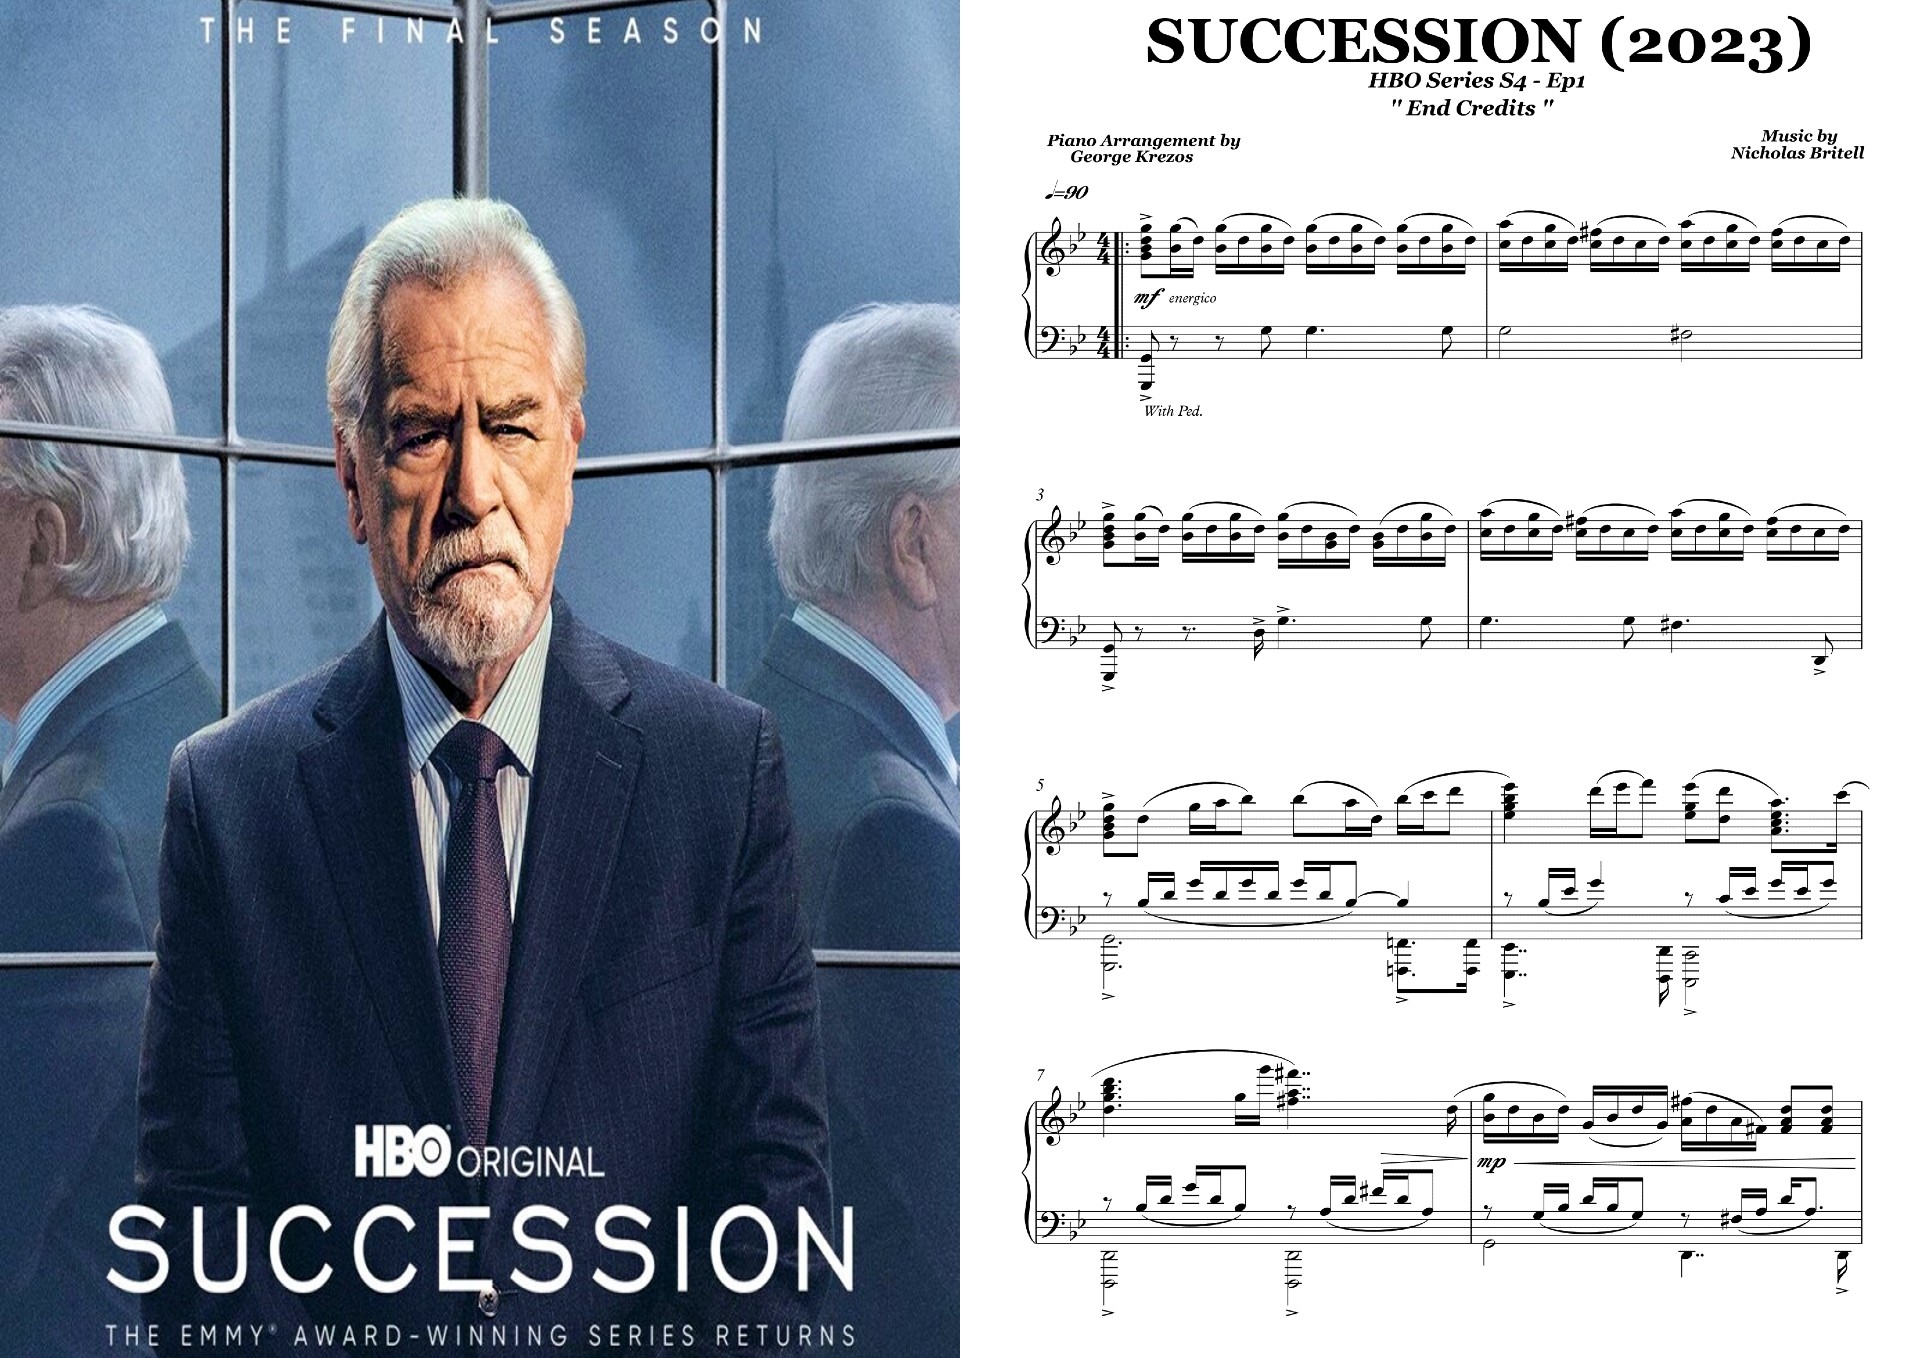 SUCCESSION S4 - Ep1 End Credits.jpg